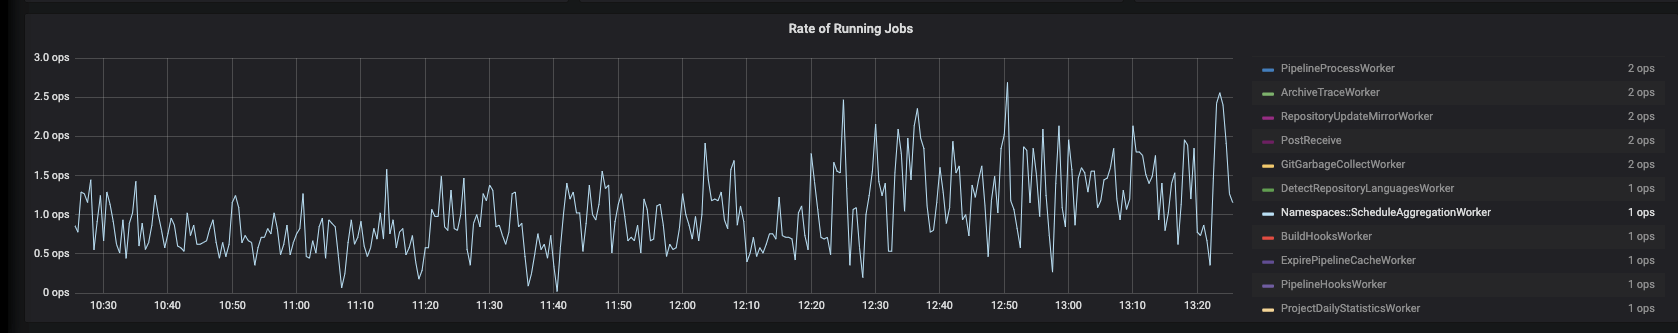 Graph showing the rate running jobs of the ScheduleAggregationWorker on GitLab.com